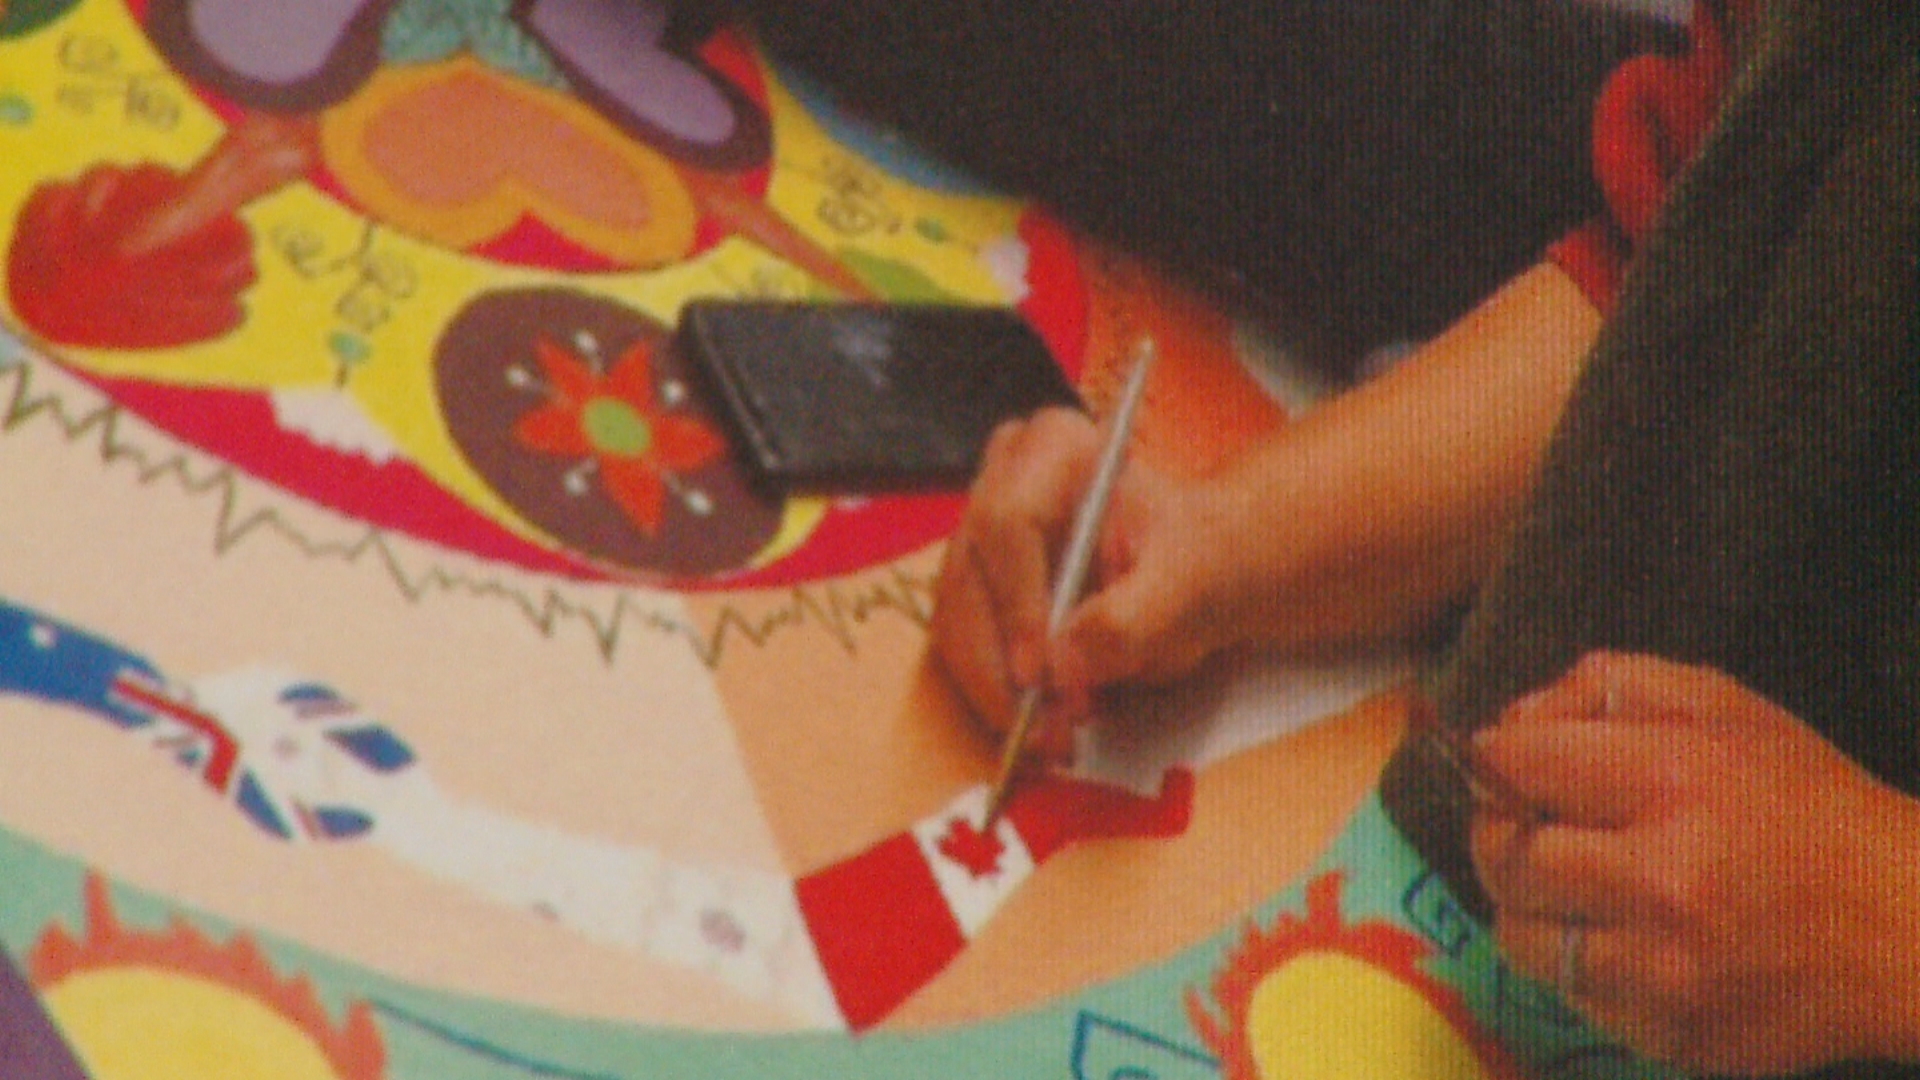 Afghan artists traveling mural makes stop at Indianapolis Artsgarden